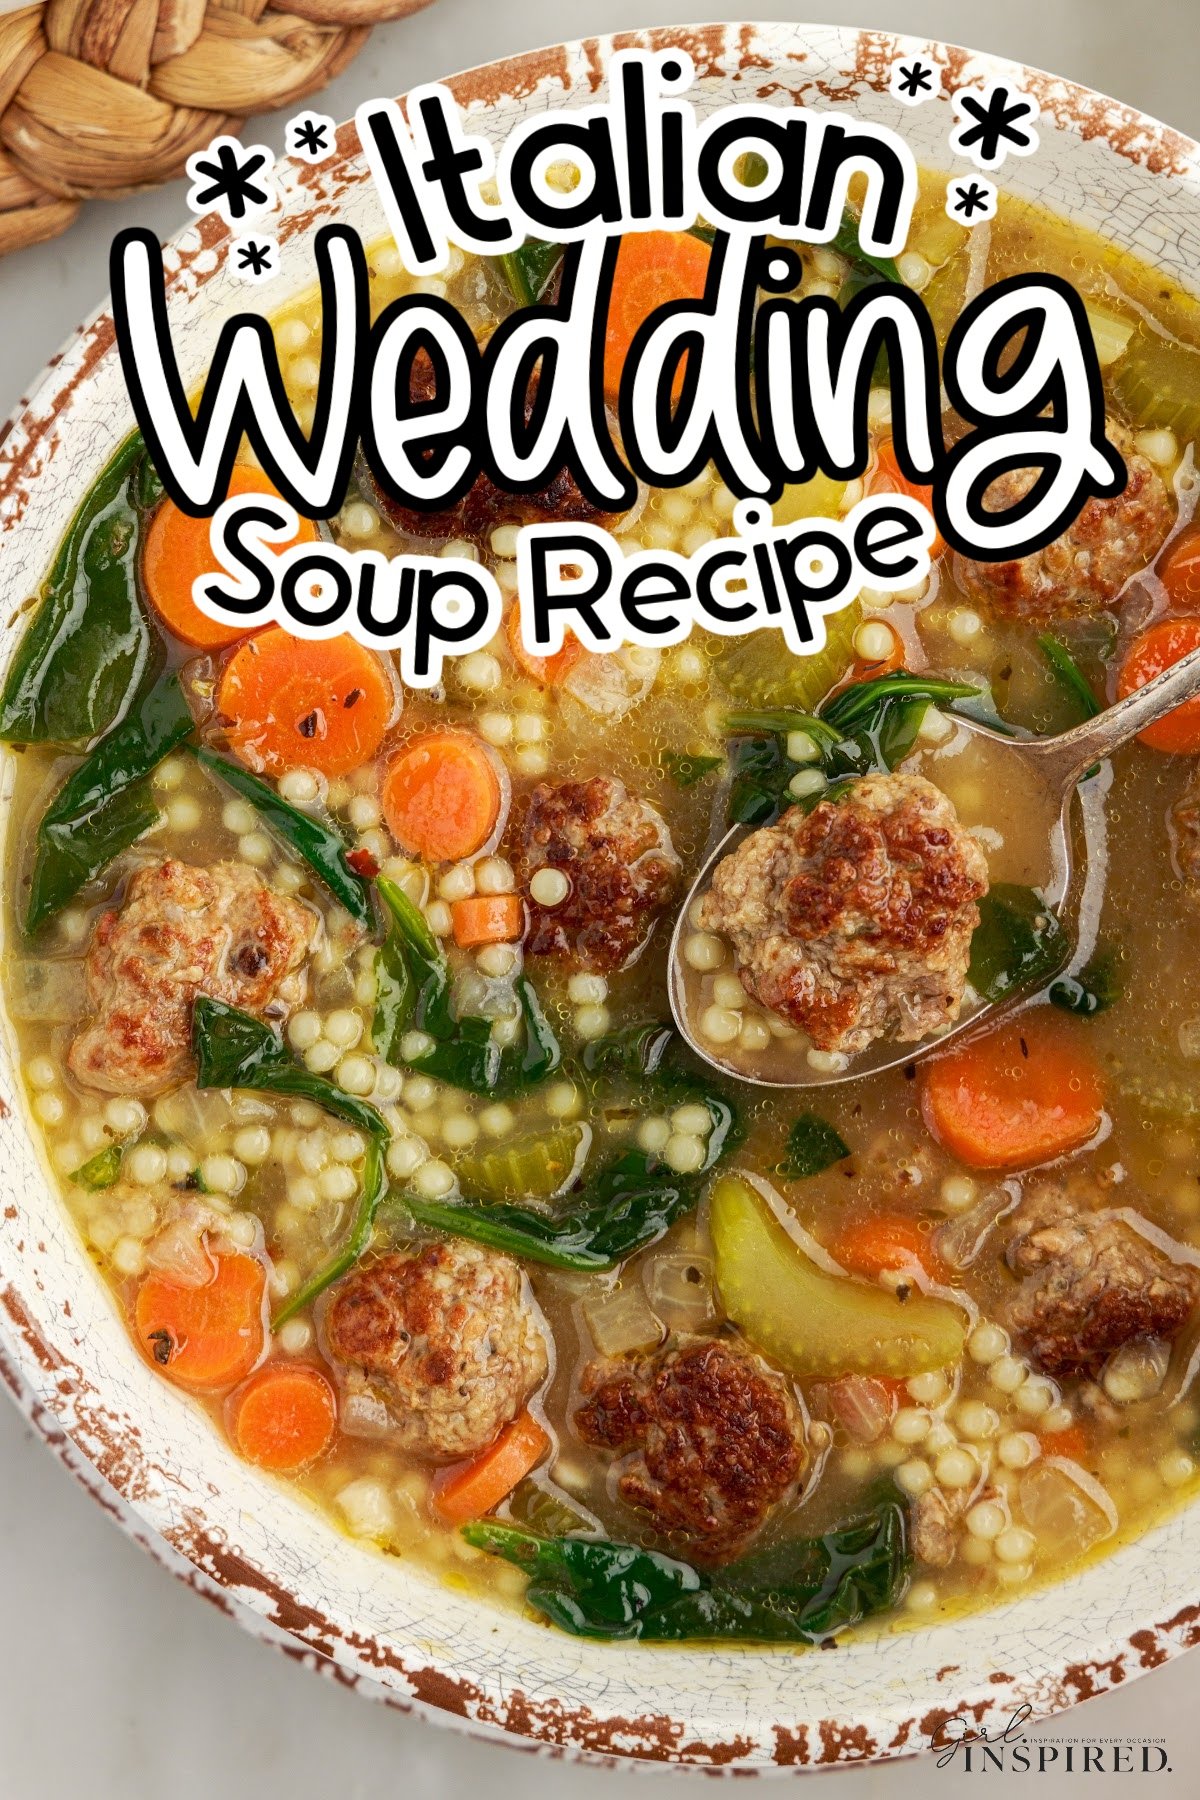 A bowl of Italian Wedding Soup with text overlay.